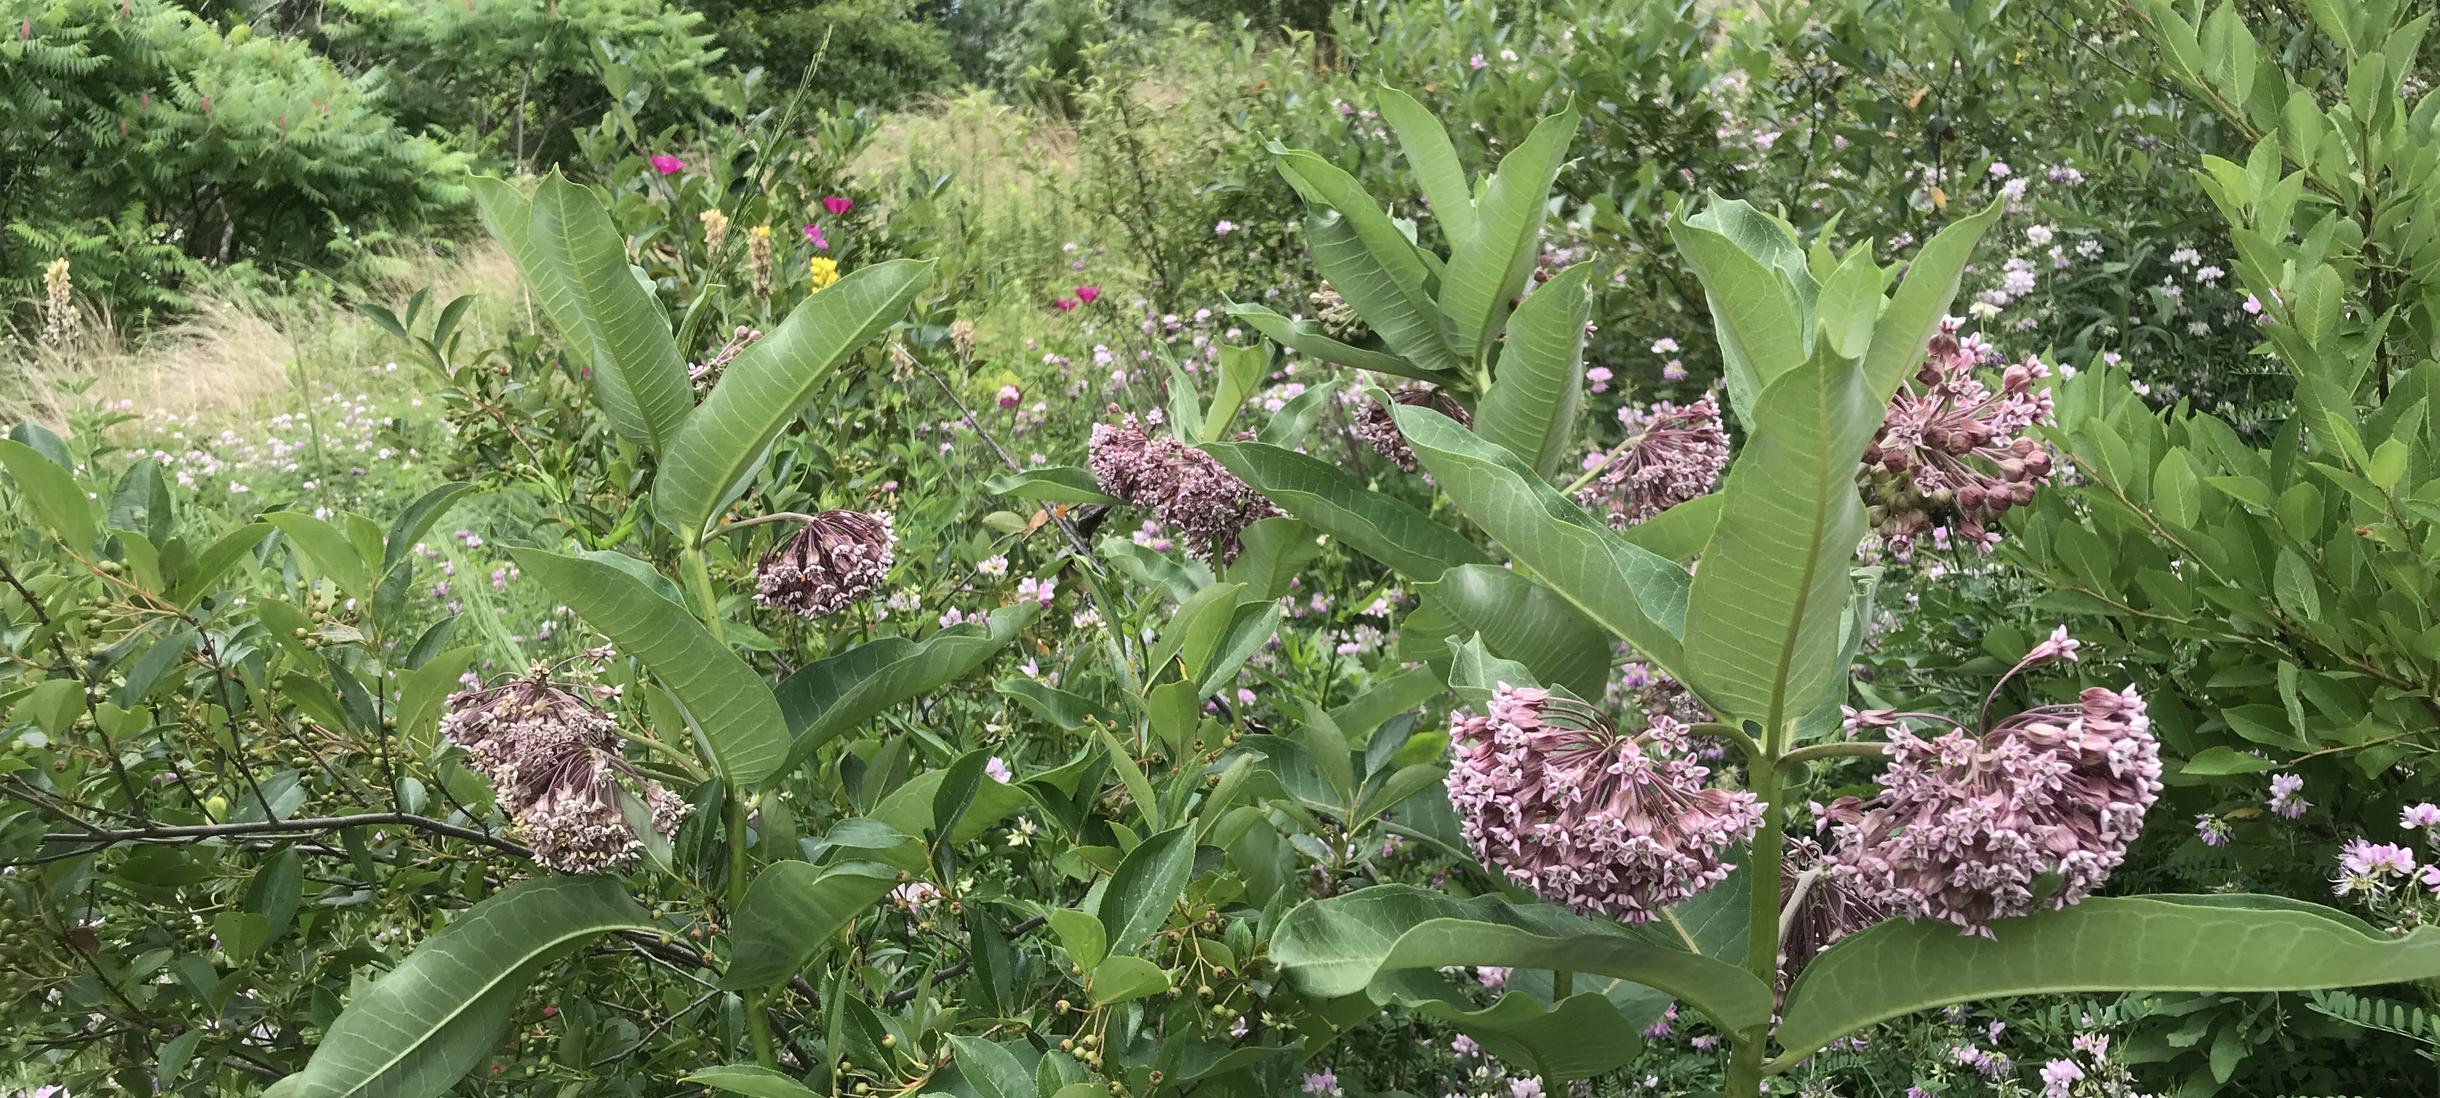 Photo of common milkweed blooming in the Edible Ecosystem